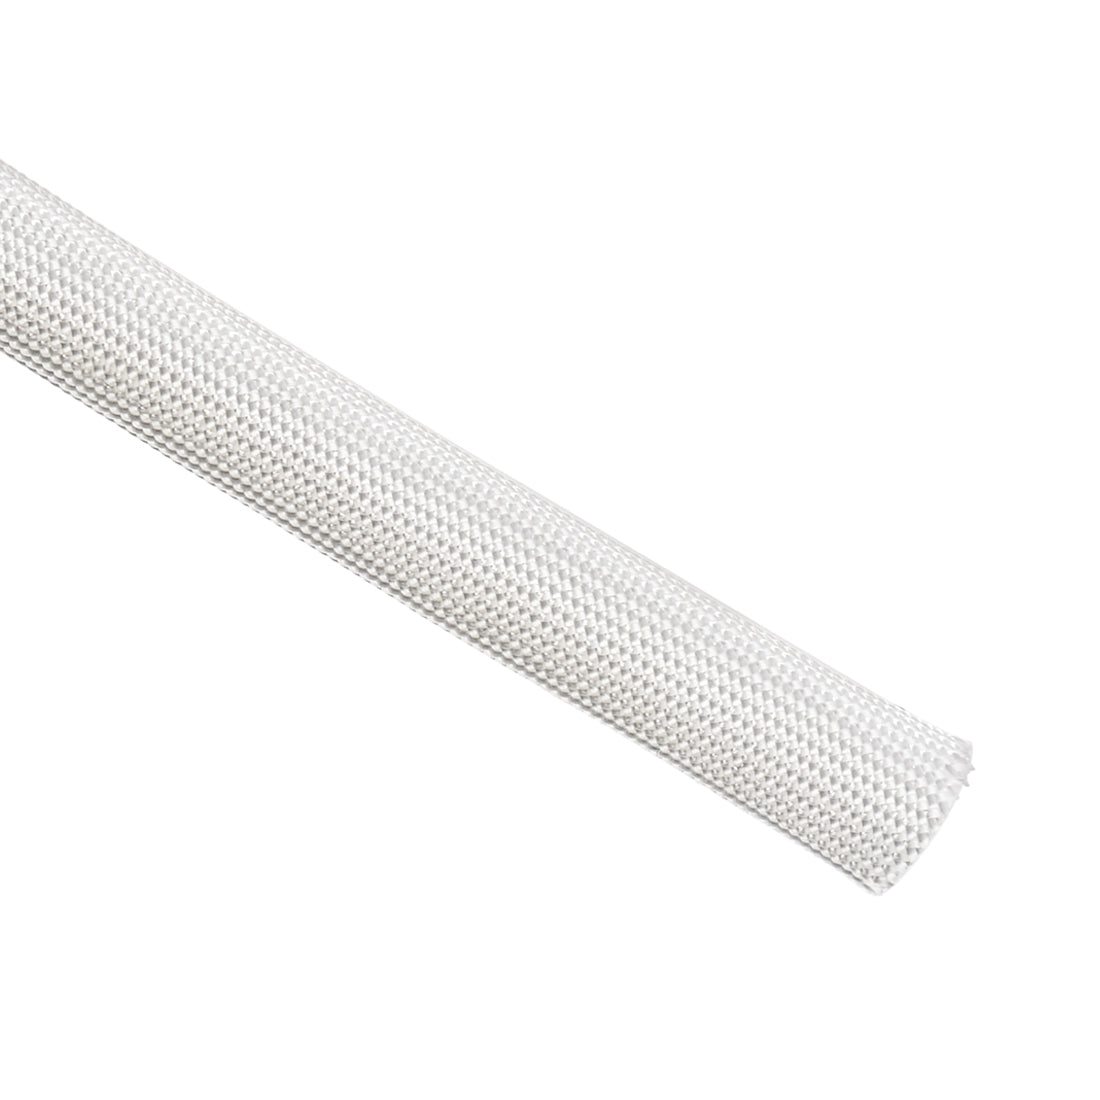 uxcell Uxcell Insulation Cable Protector, 16.4Ft-12mm High TEMP Fiberglass Sleeve White